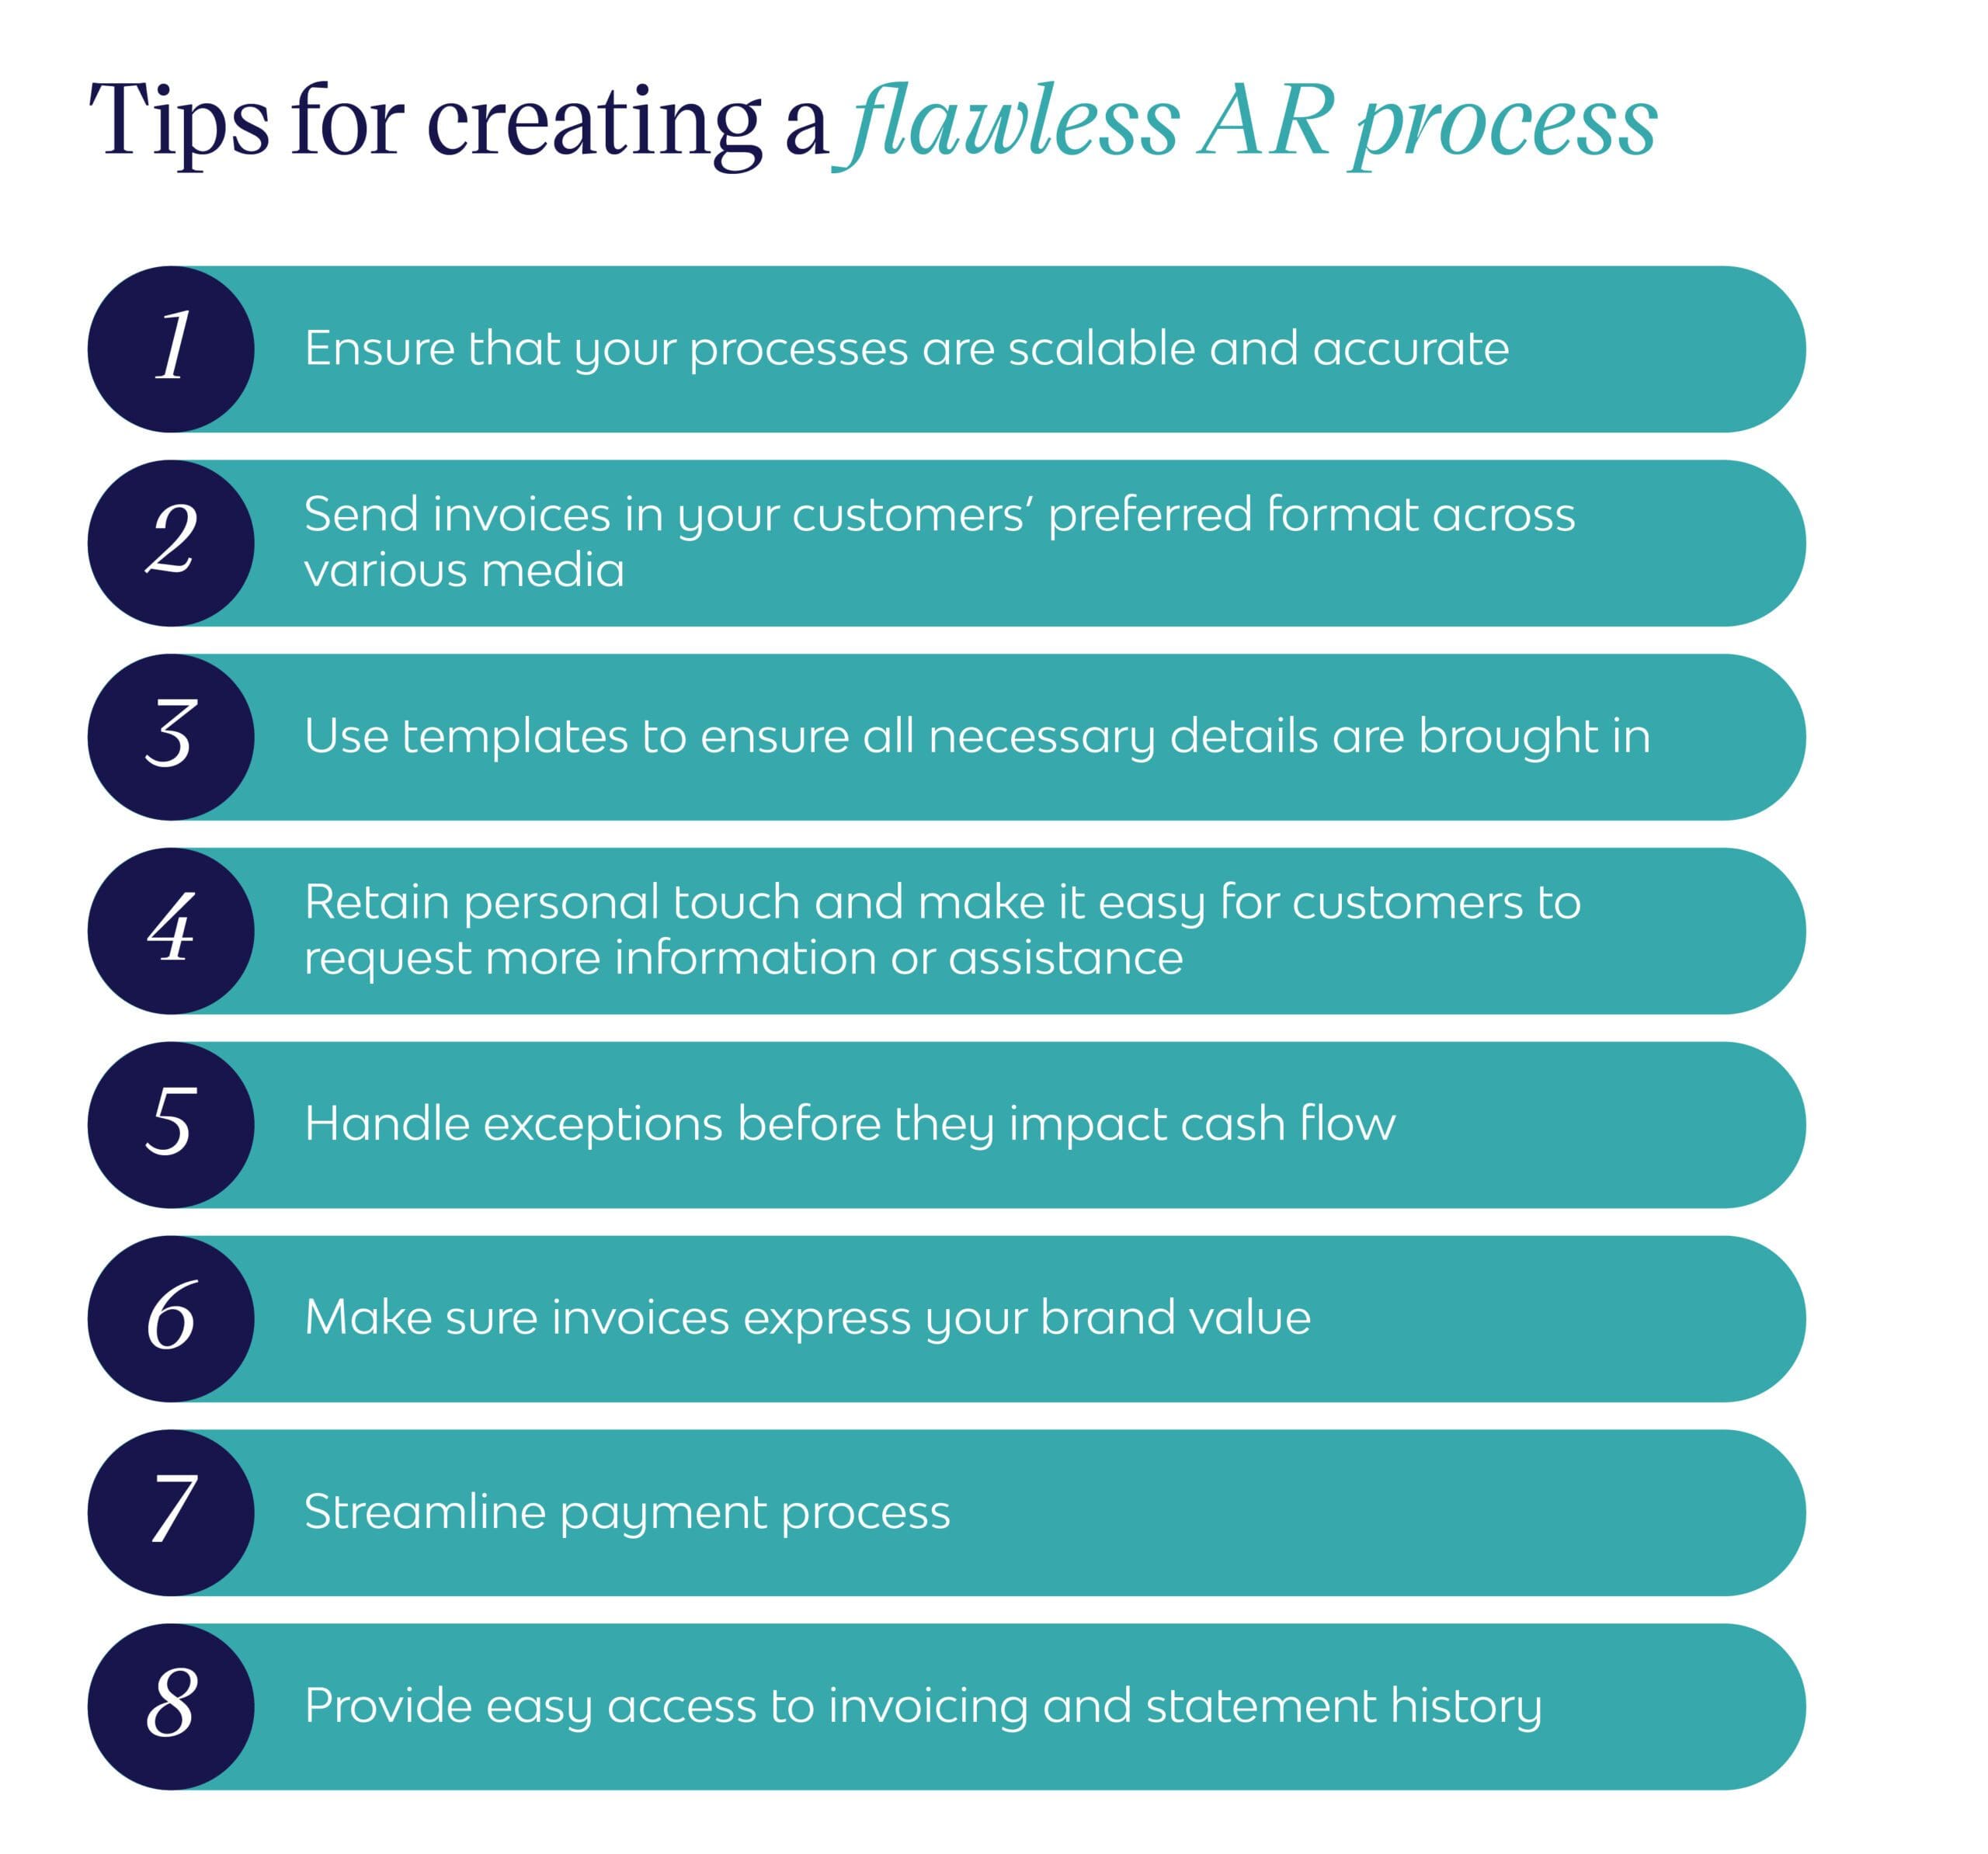 What is accounts receivable? Here are 8 tips for creating a flawless AR process.